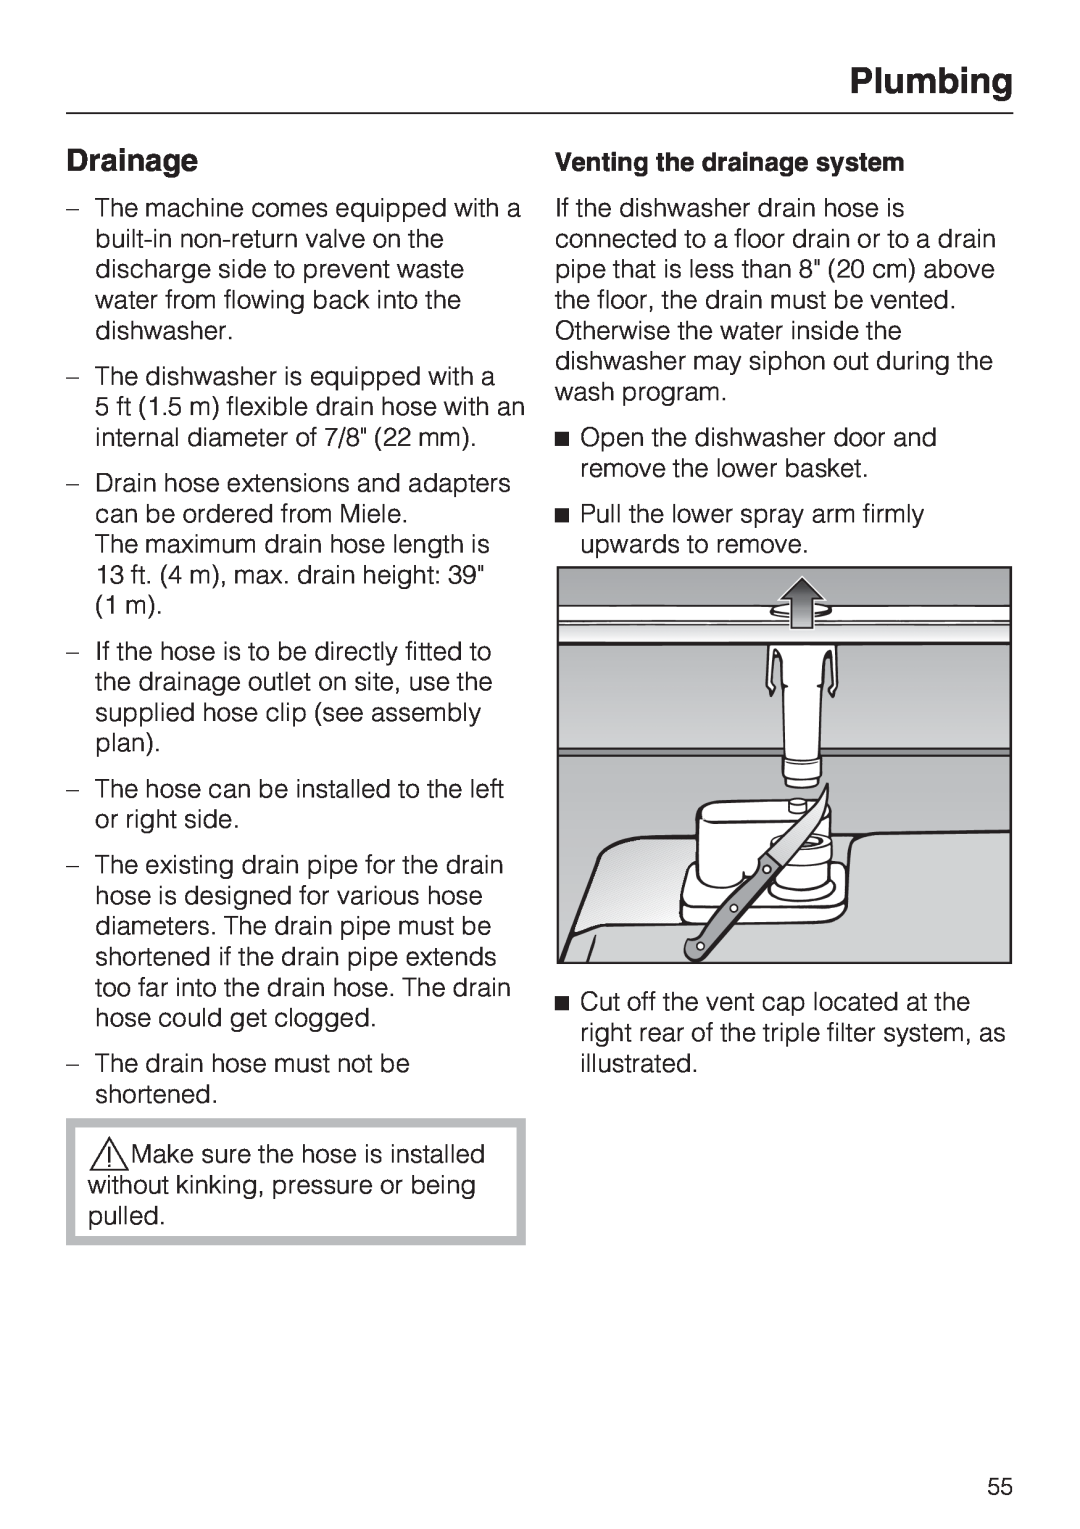 Miele G2142 operating instructions Drainage, Plumbing, Venting the drainage system 